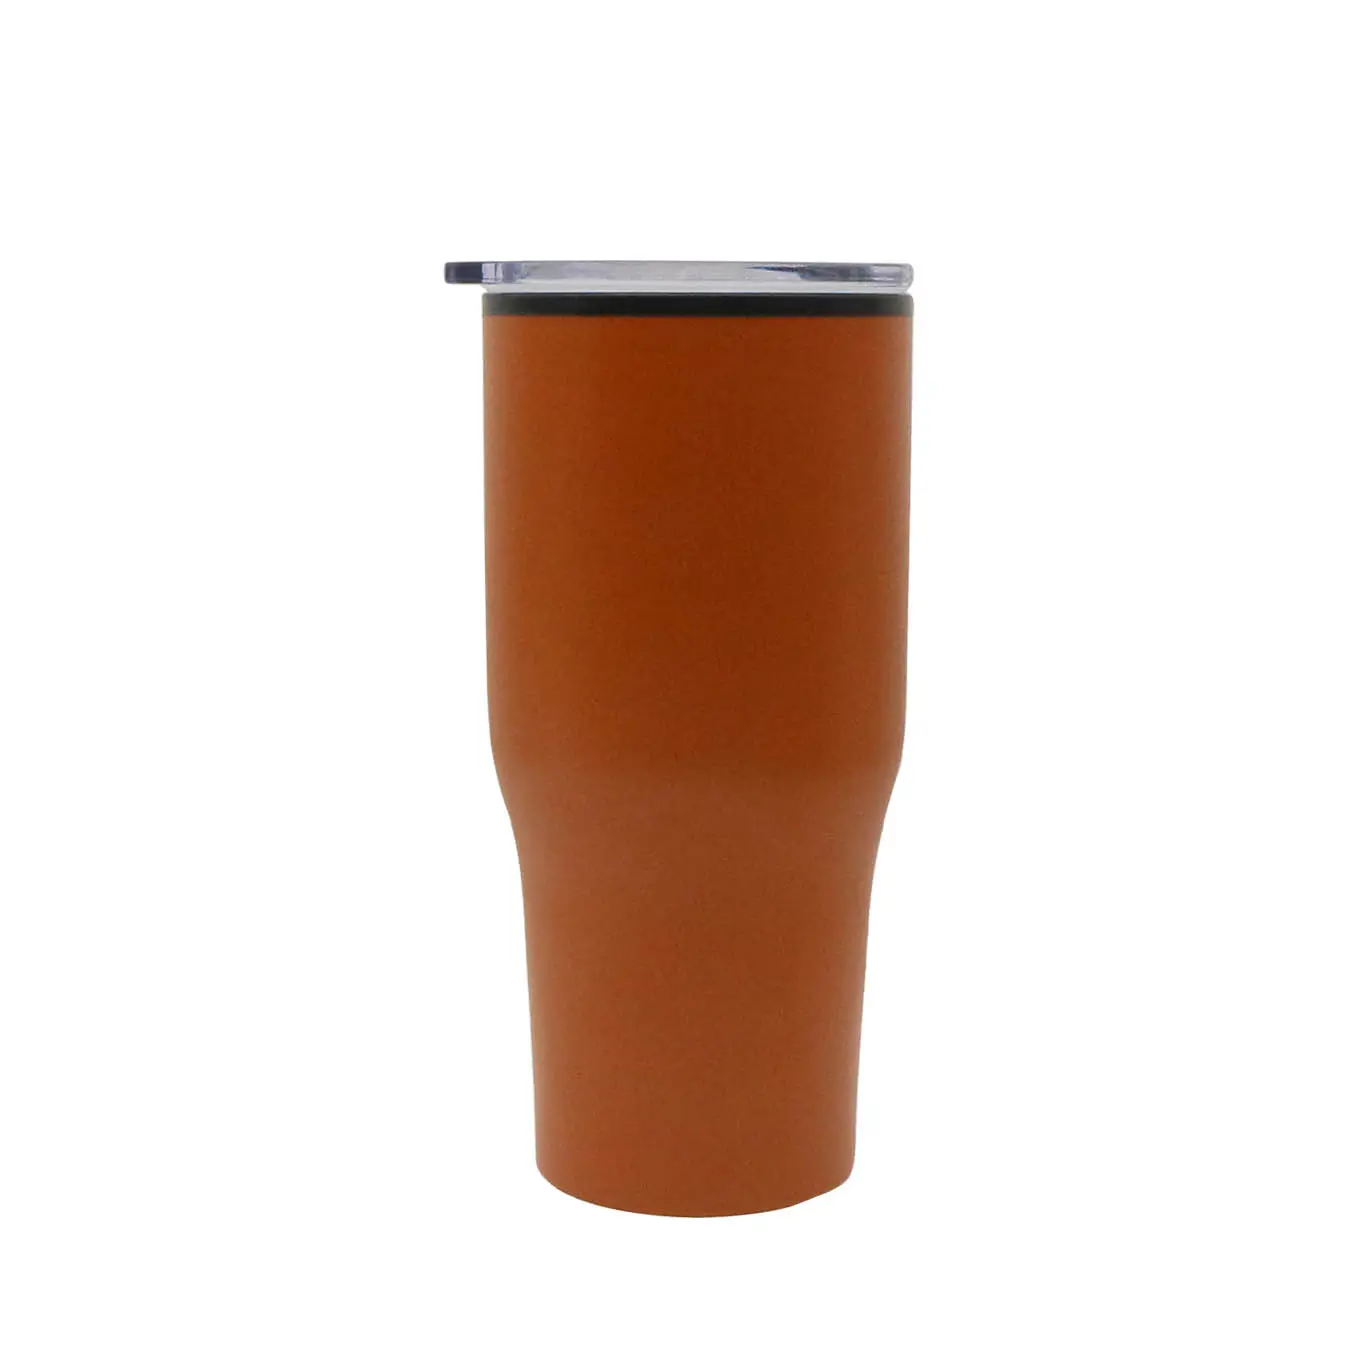 26oz Stainless Steel Tumbler Coffee Beer Mug Double Layer Mugs Outside Metal Inside Plastic Bottle With Lid